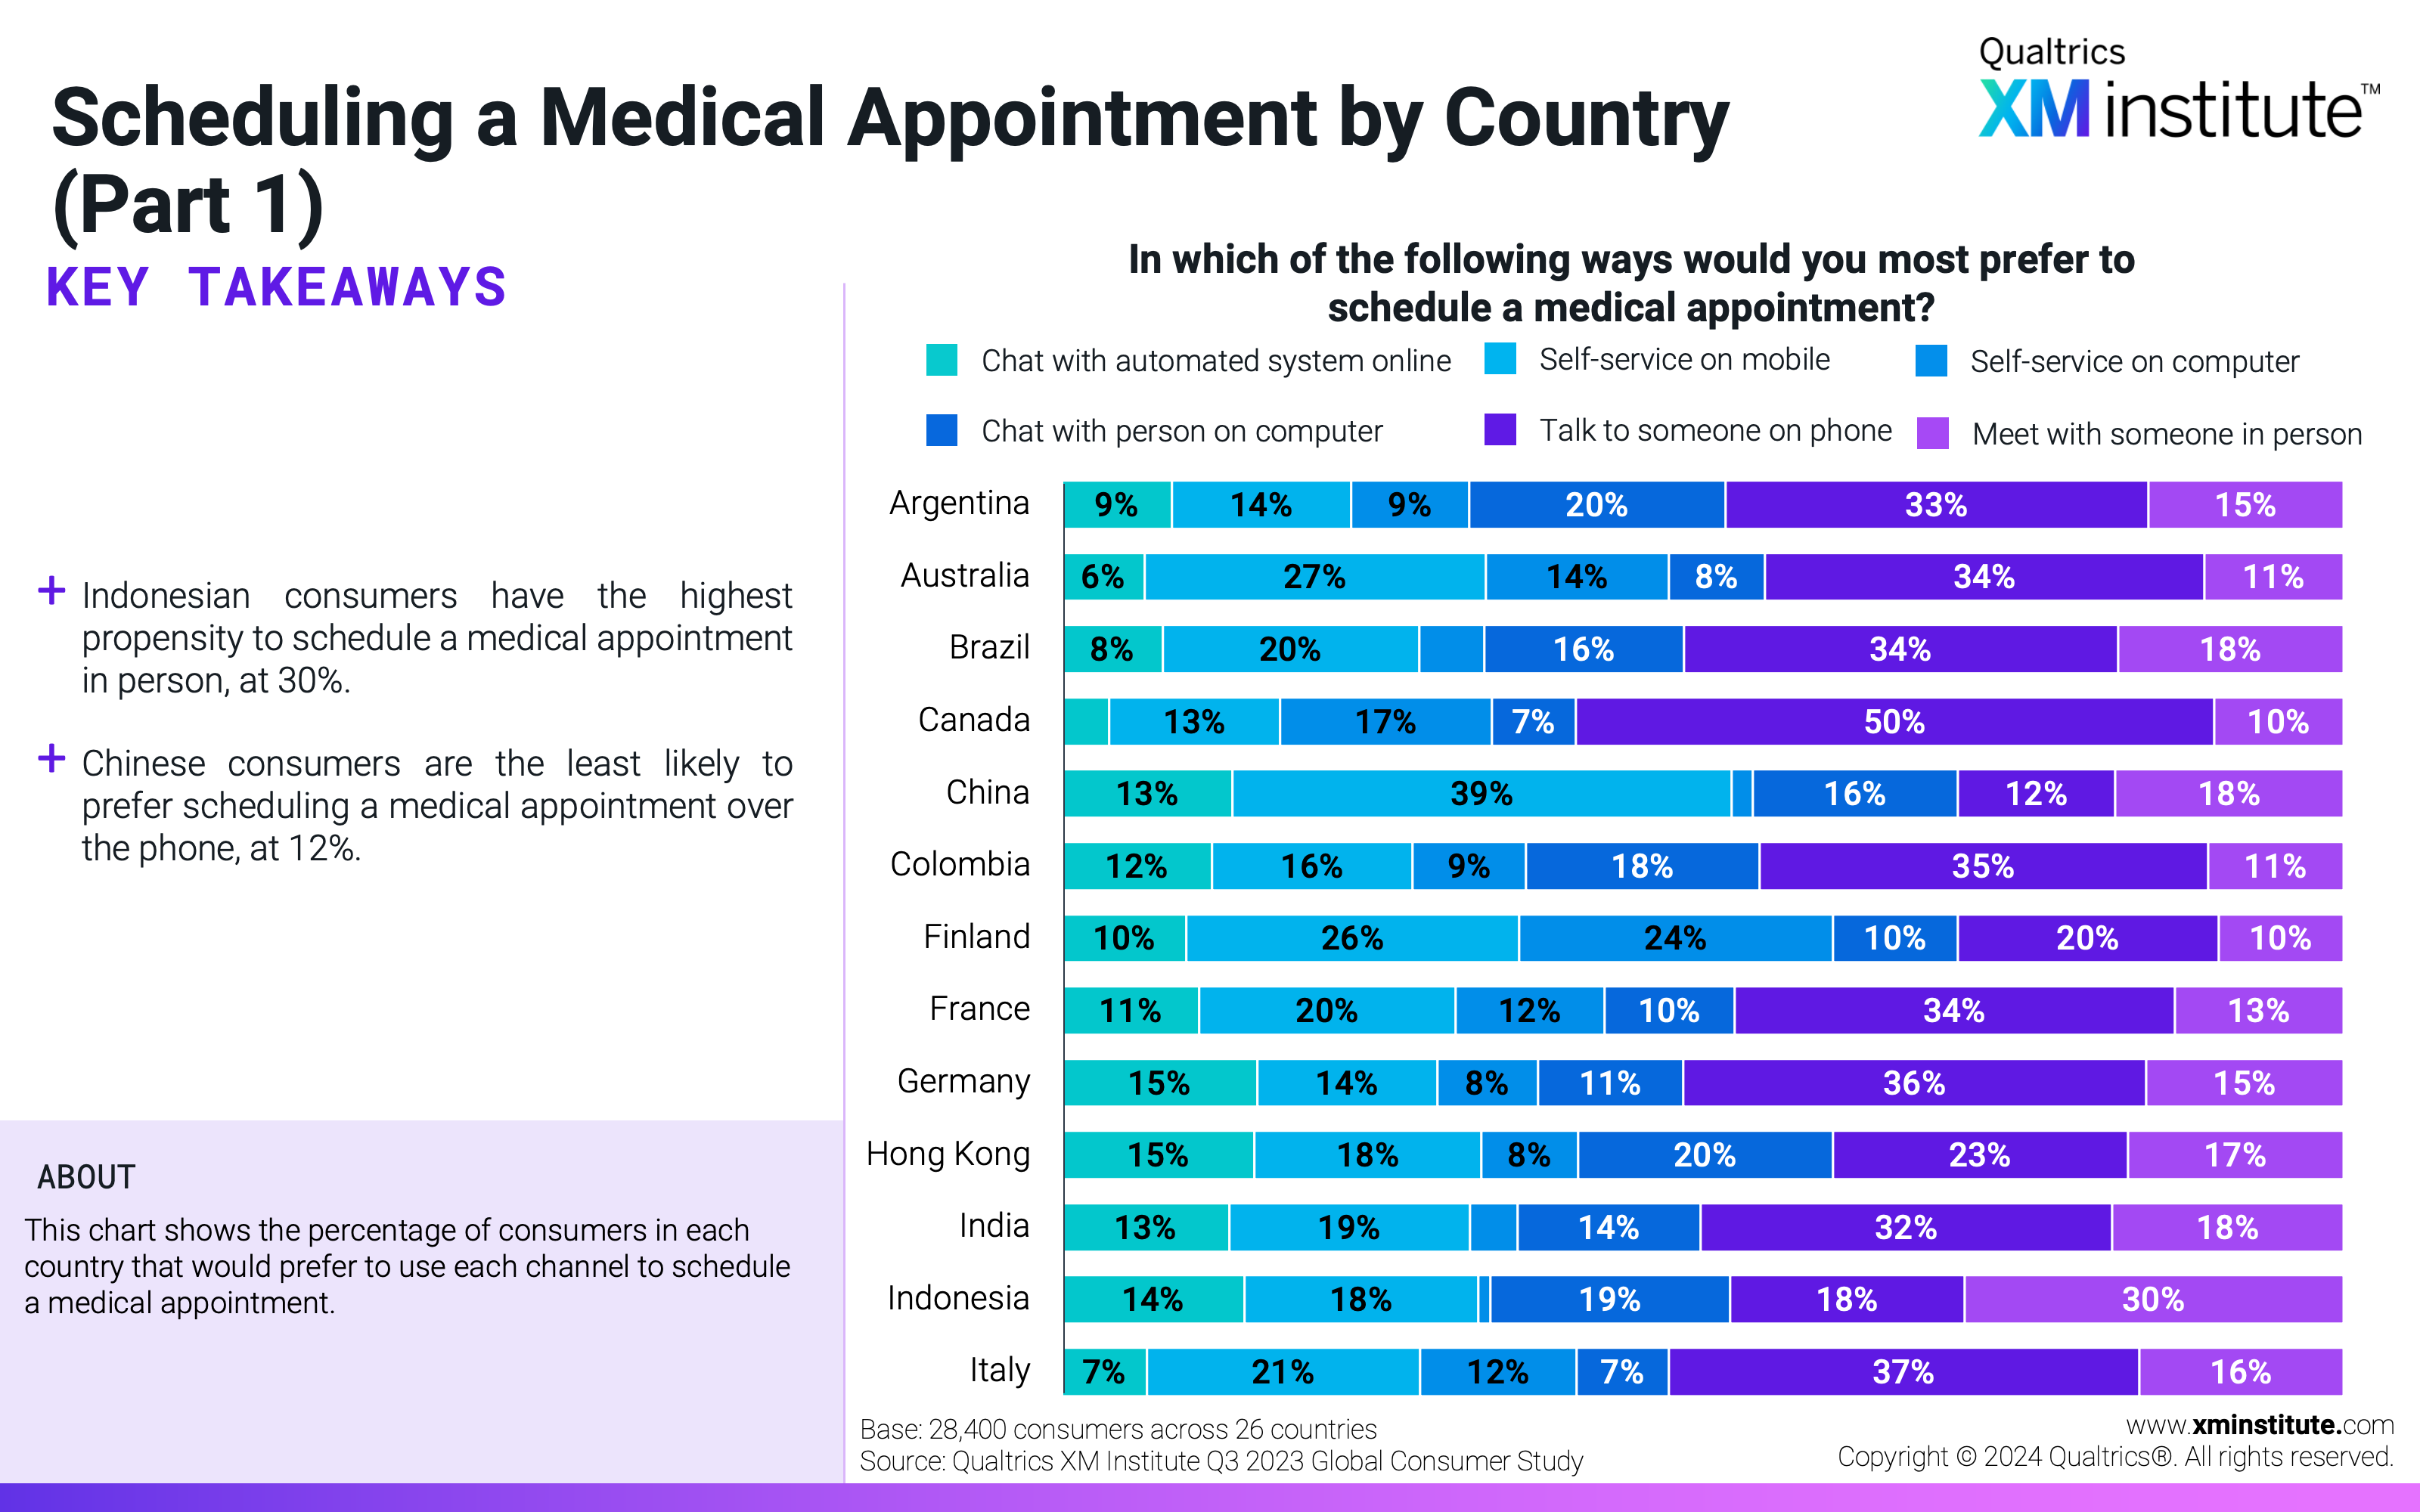 This chart shows the percentage of consumers in each country that would prefer to use each channel to schedule a medical appointment. 